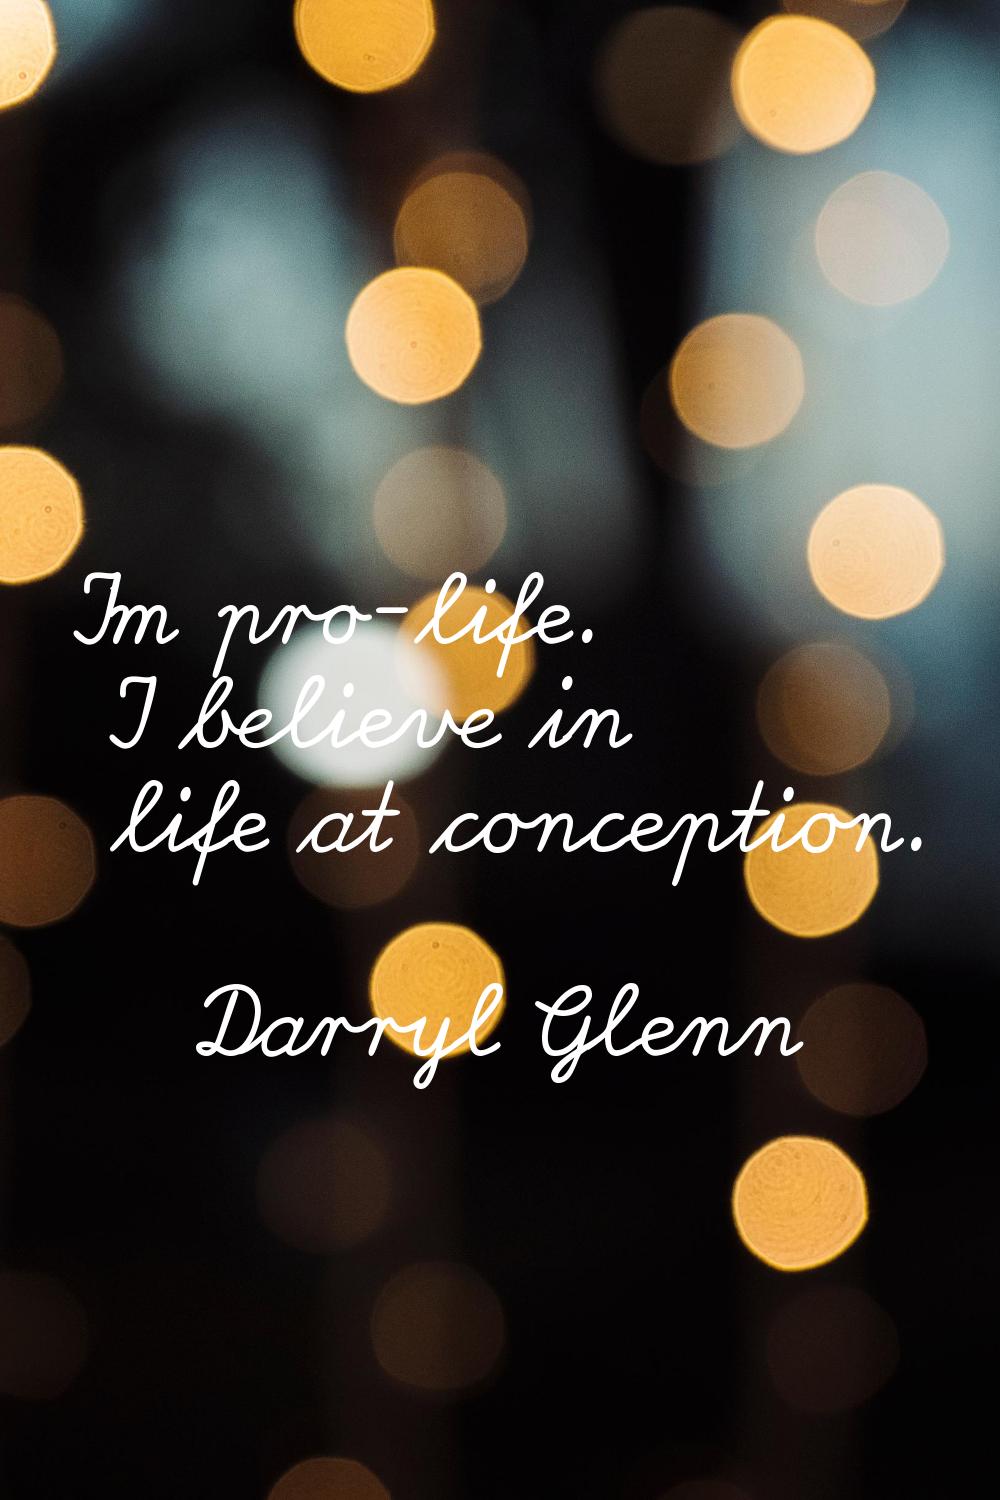 I'm pro-life. I believe in life at conception.